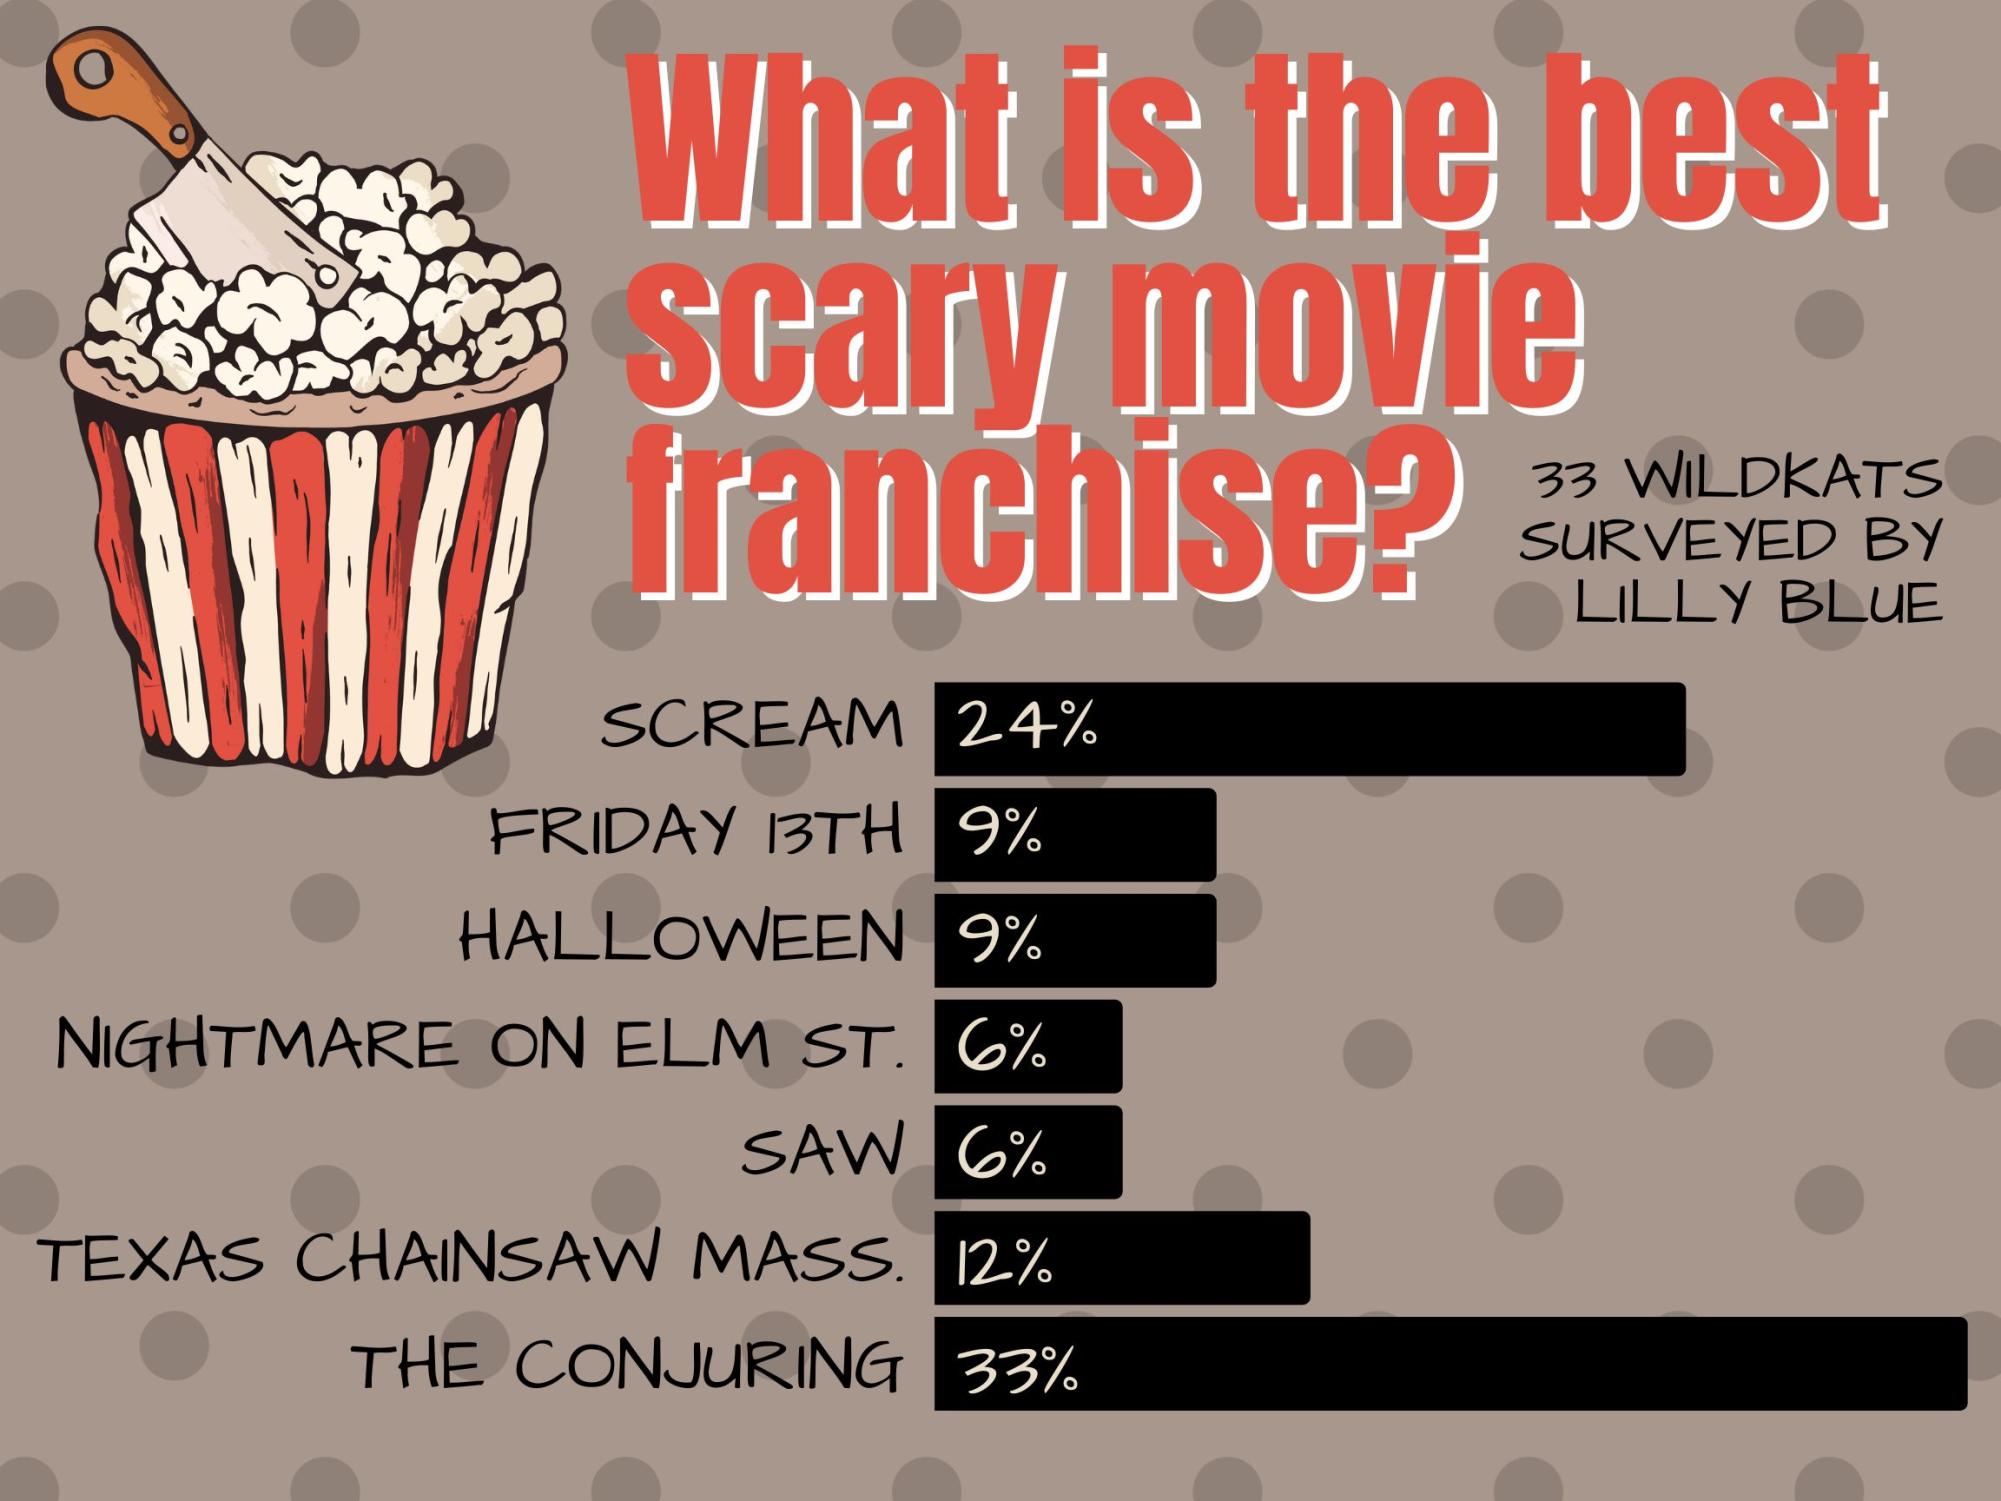 What is the best scary movie franchise?